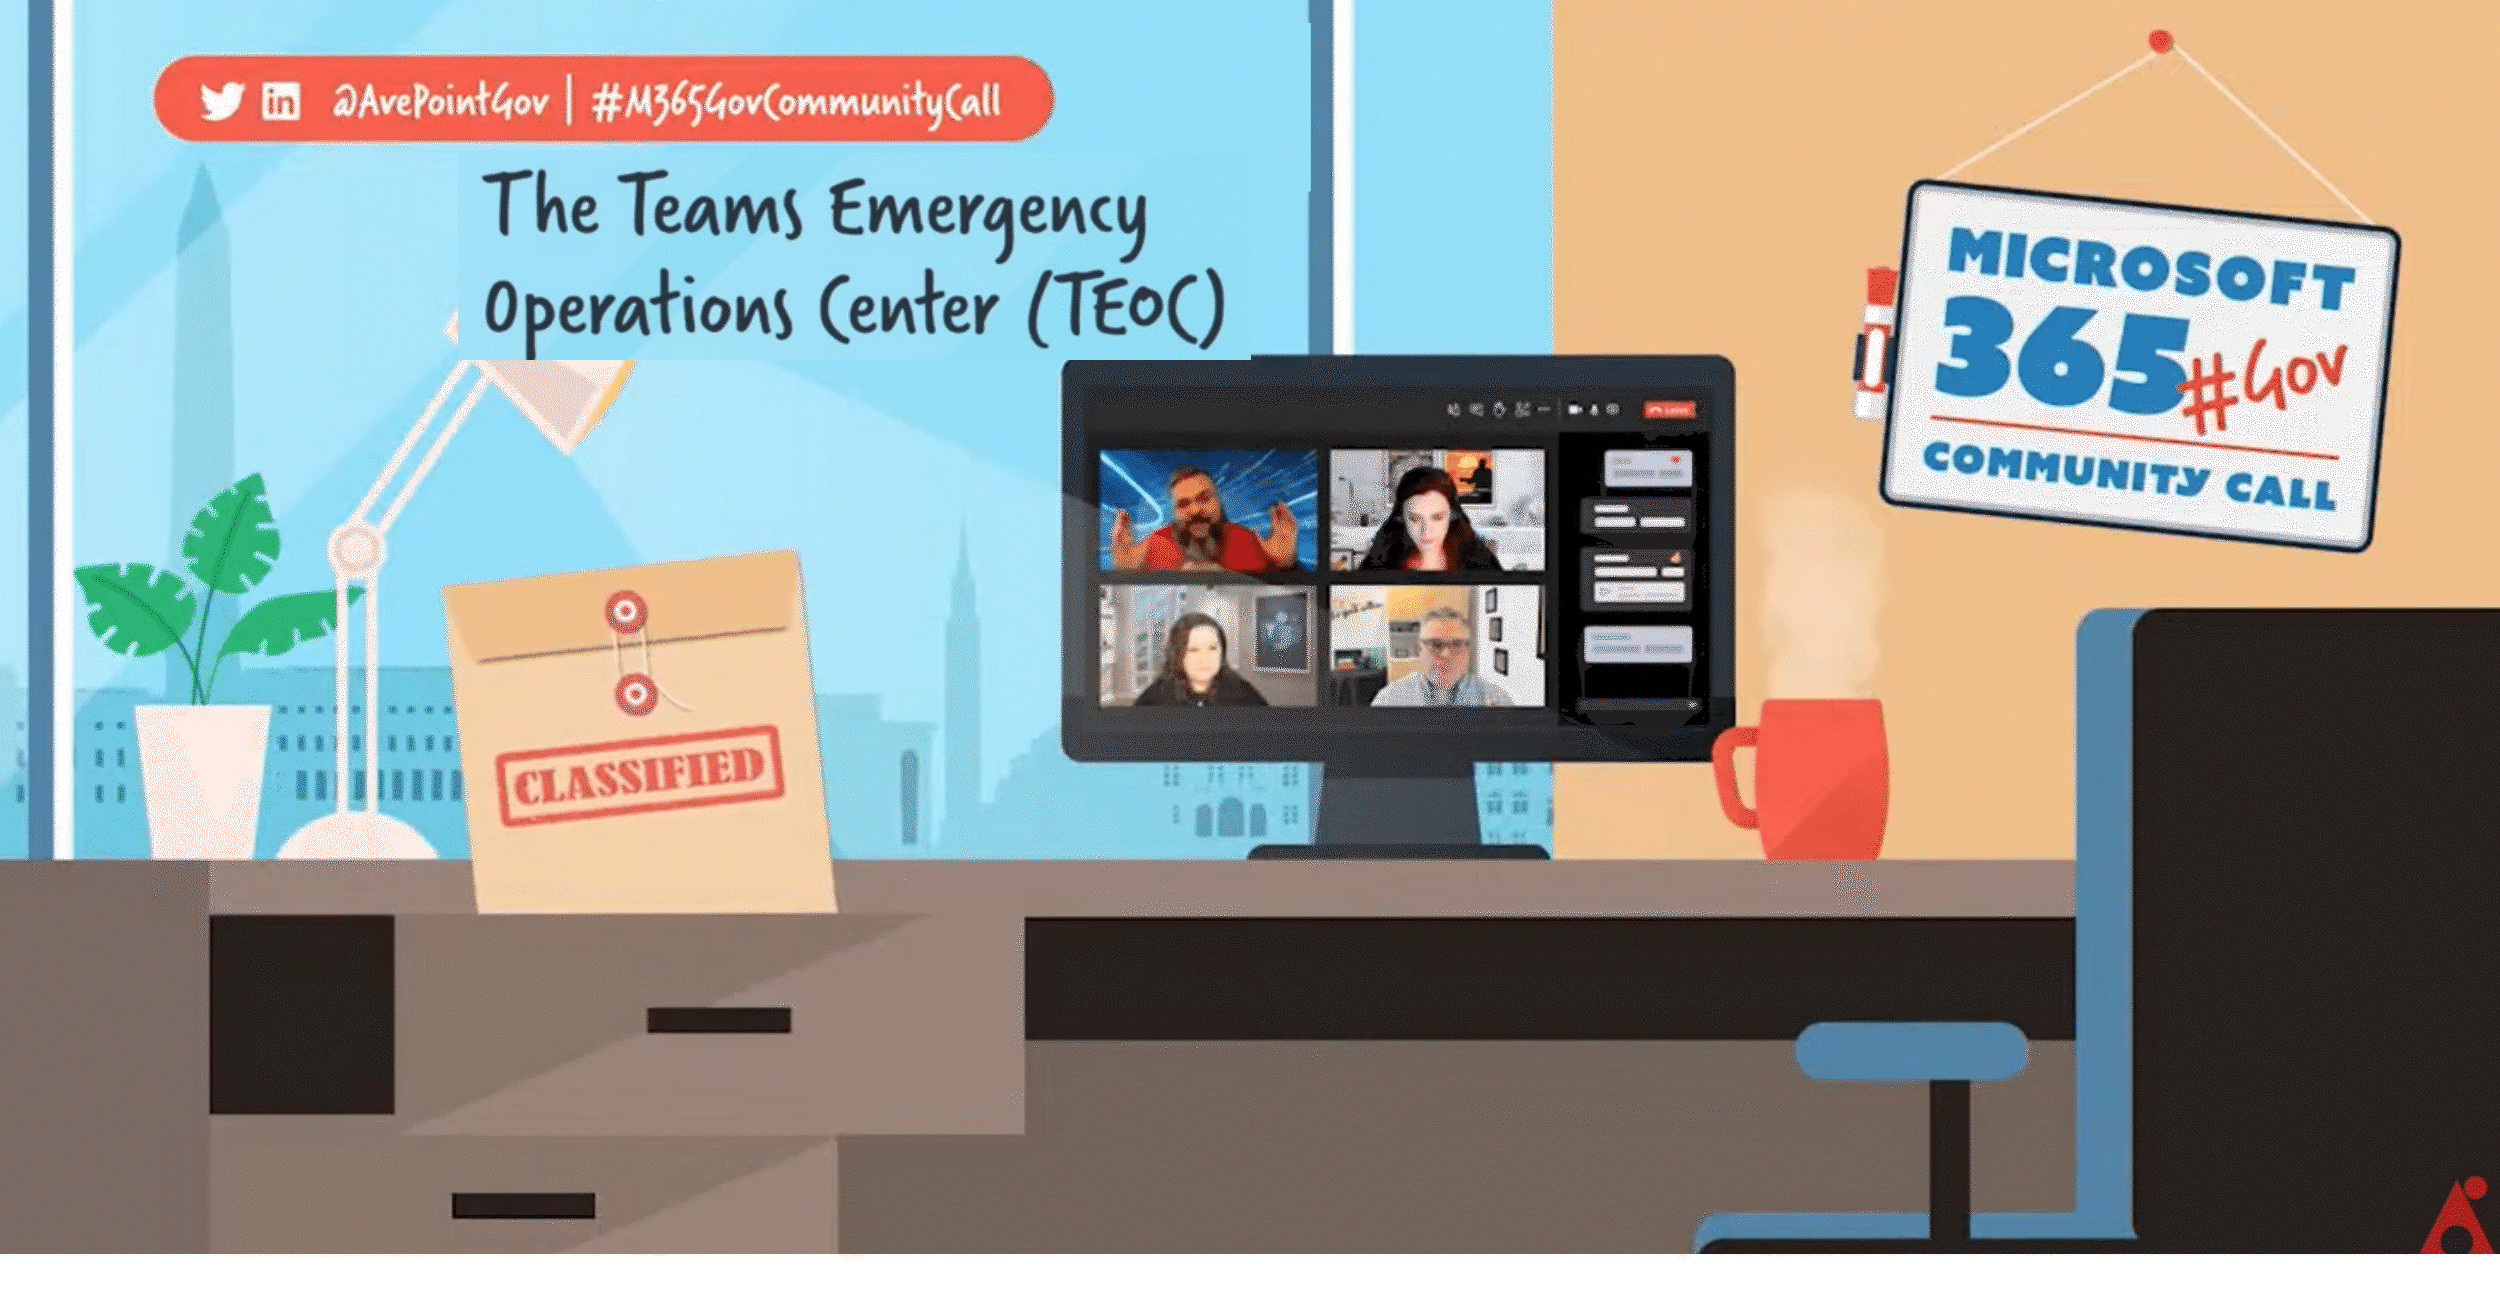 Centralize Incident Response Management with the Teams Emergency Operations Center (TEOC)